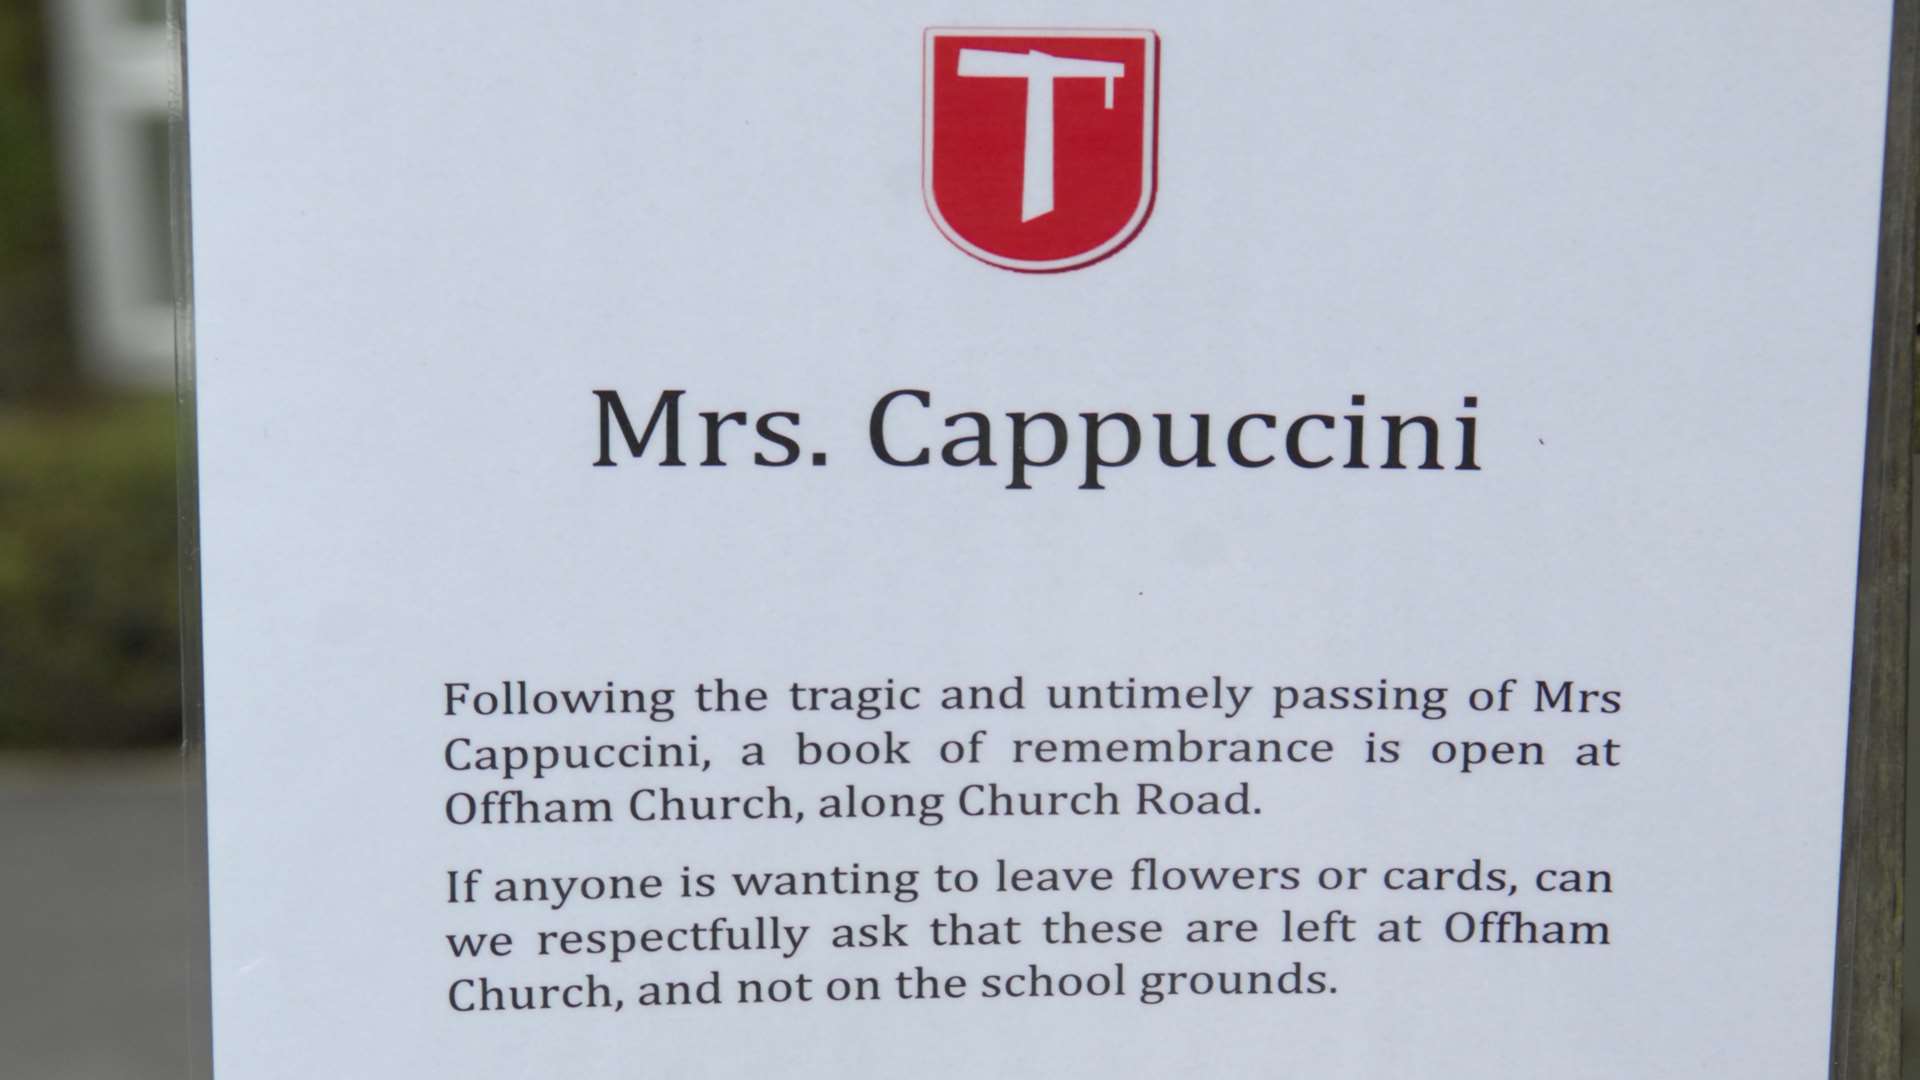 A tribute to Mrs Cappuccini was left outside Offham Primary School following her death.